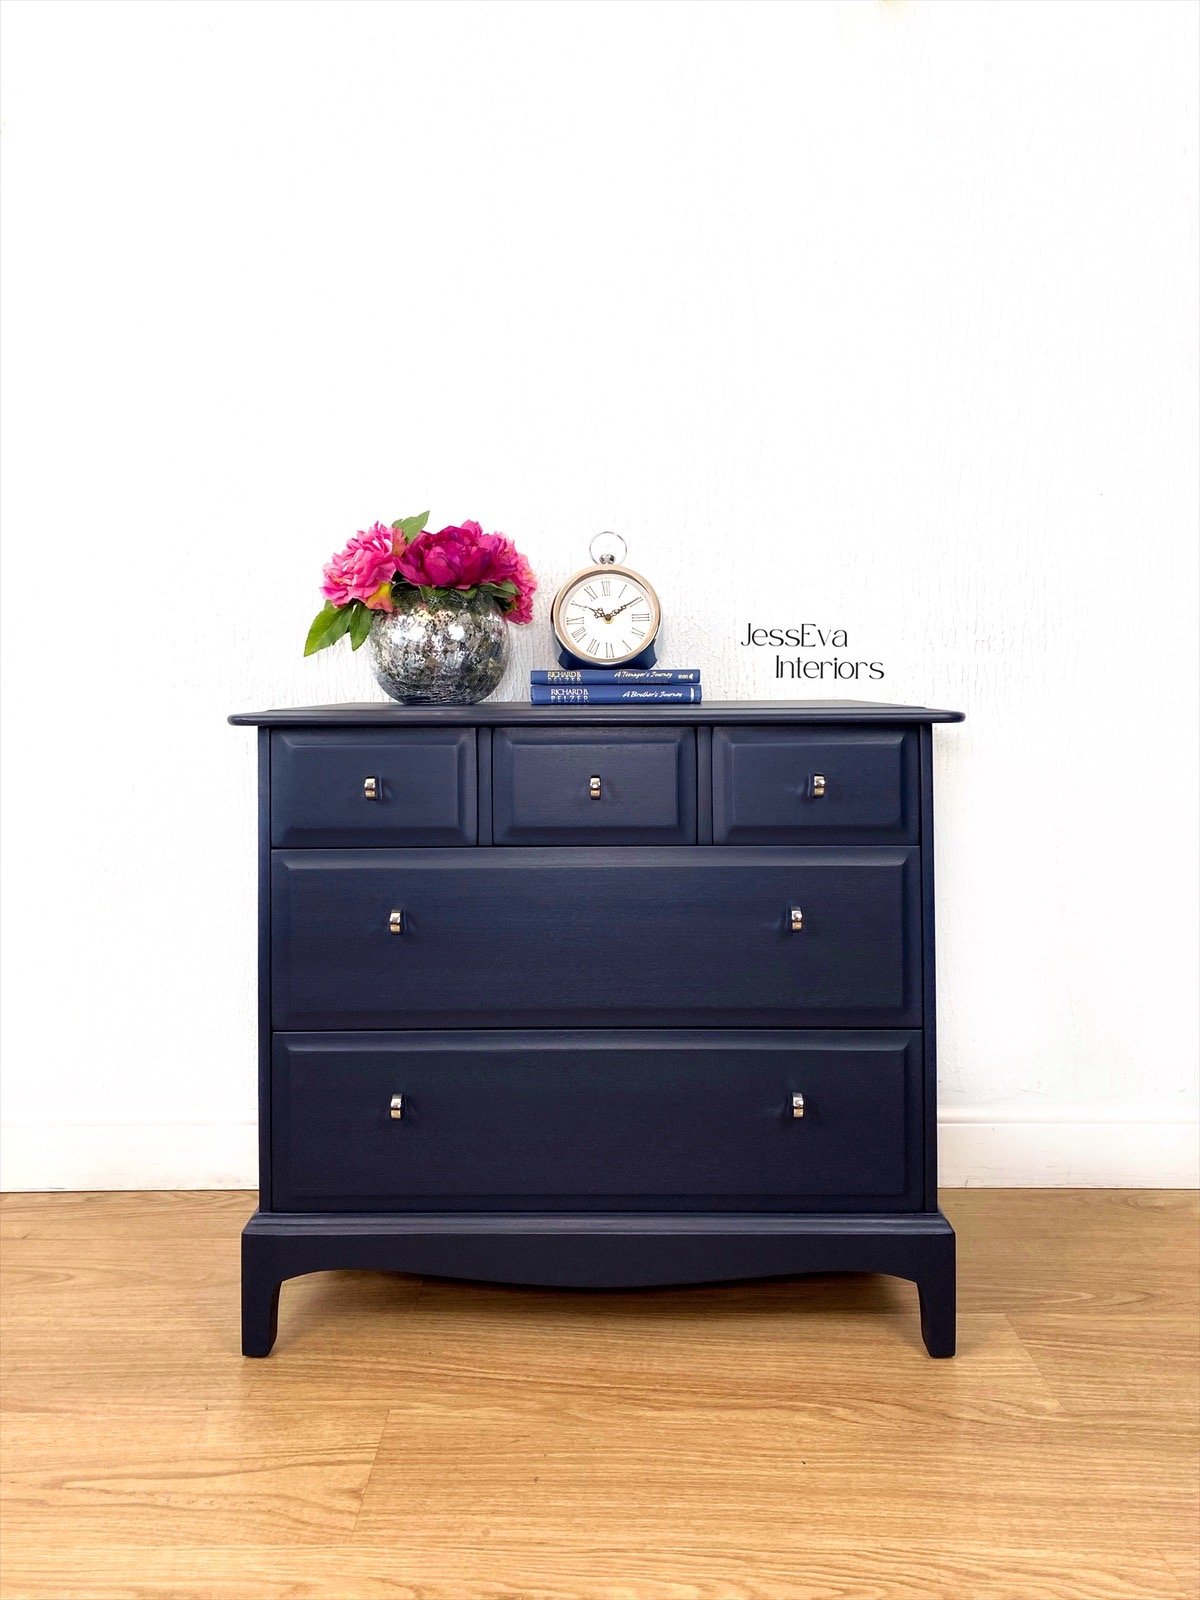 Stag Minstrel Chest of Drawers / Large Bedside Cabinet painted in